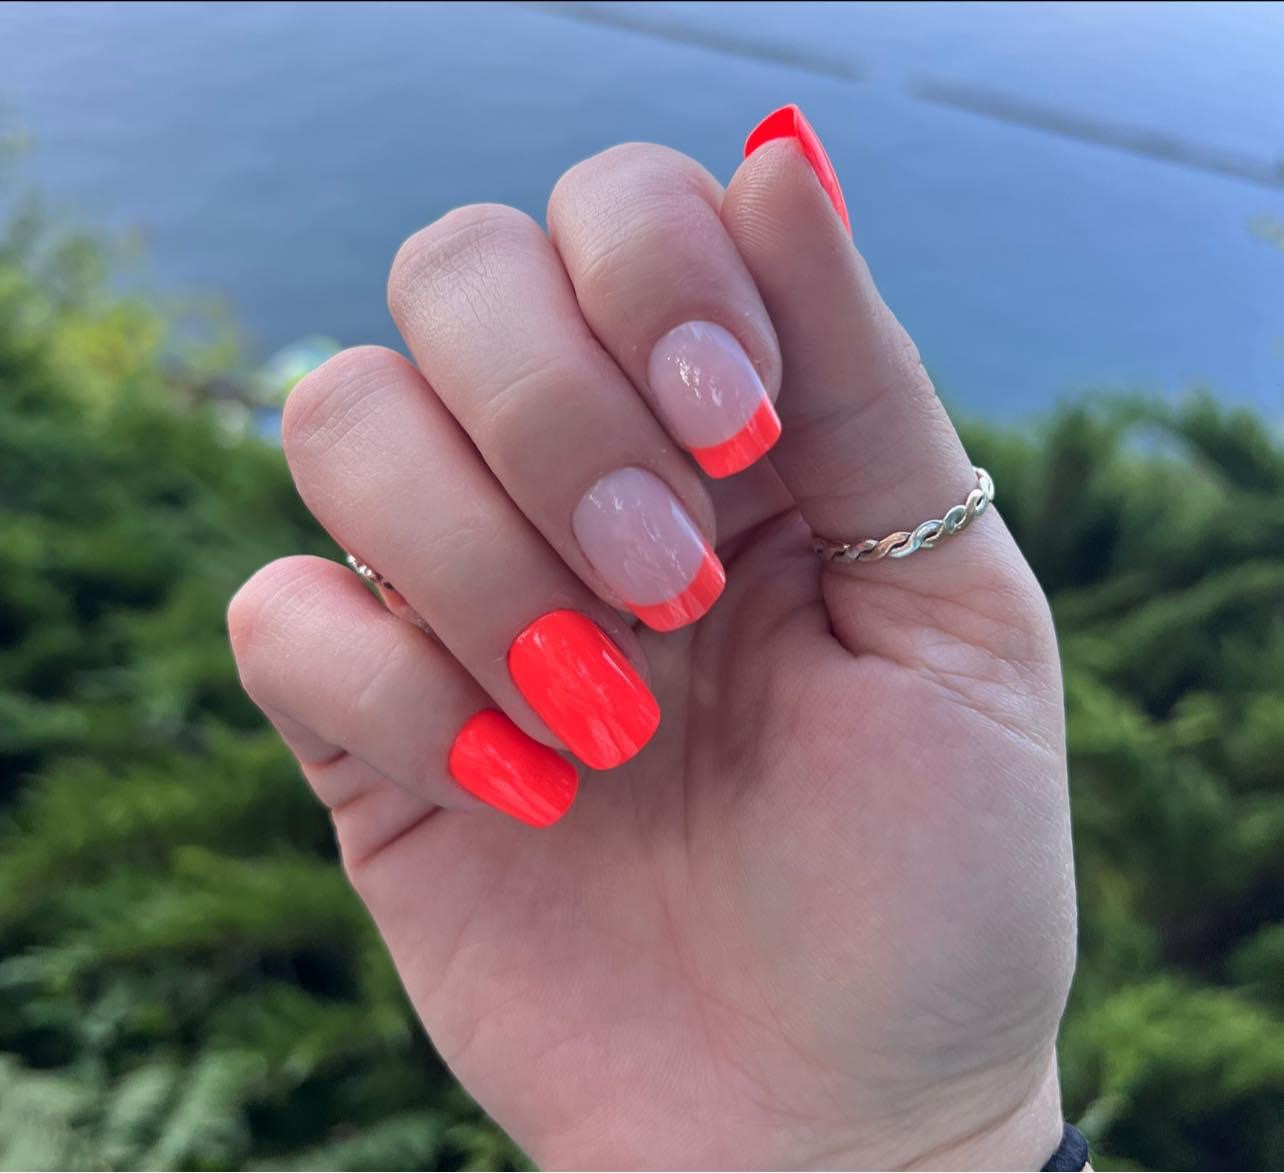 glue on nails for vacation